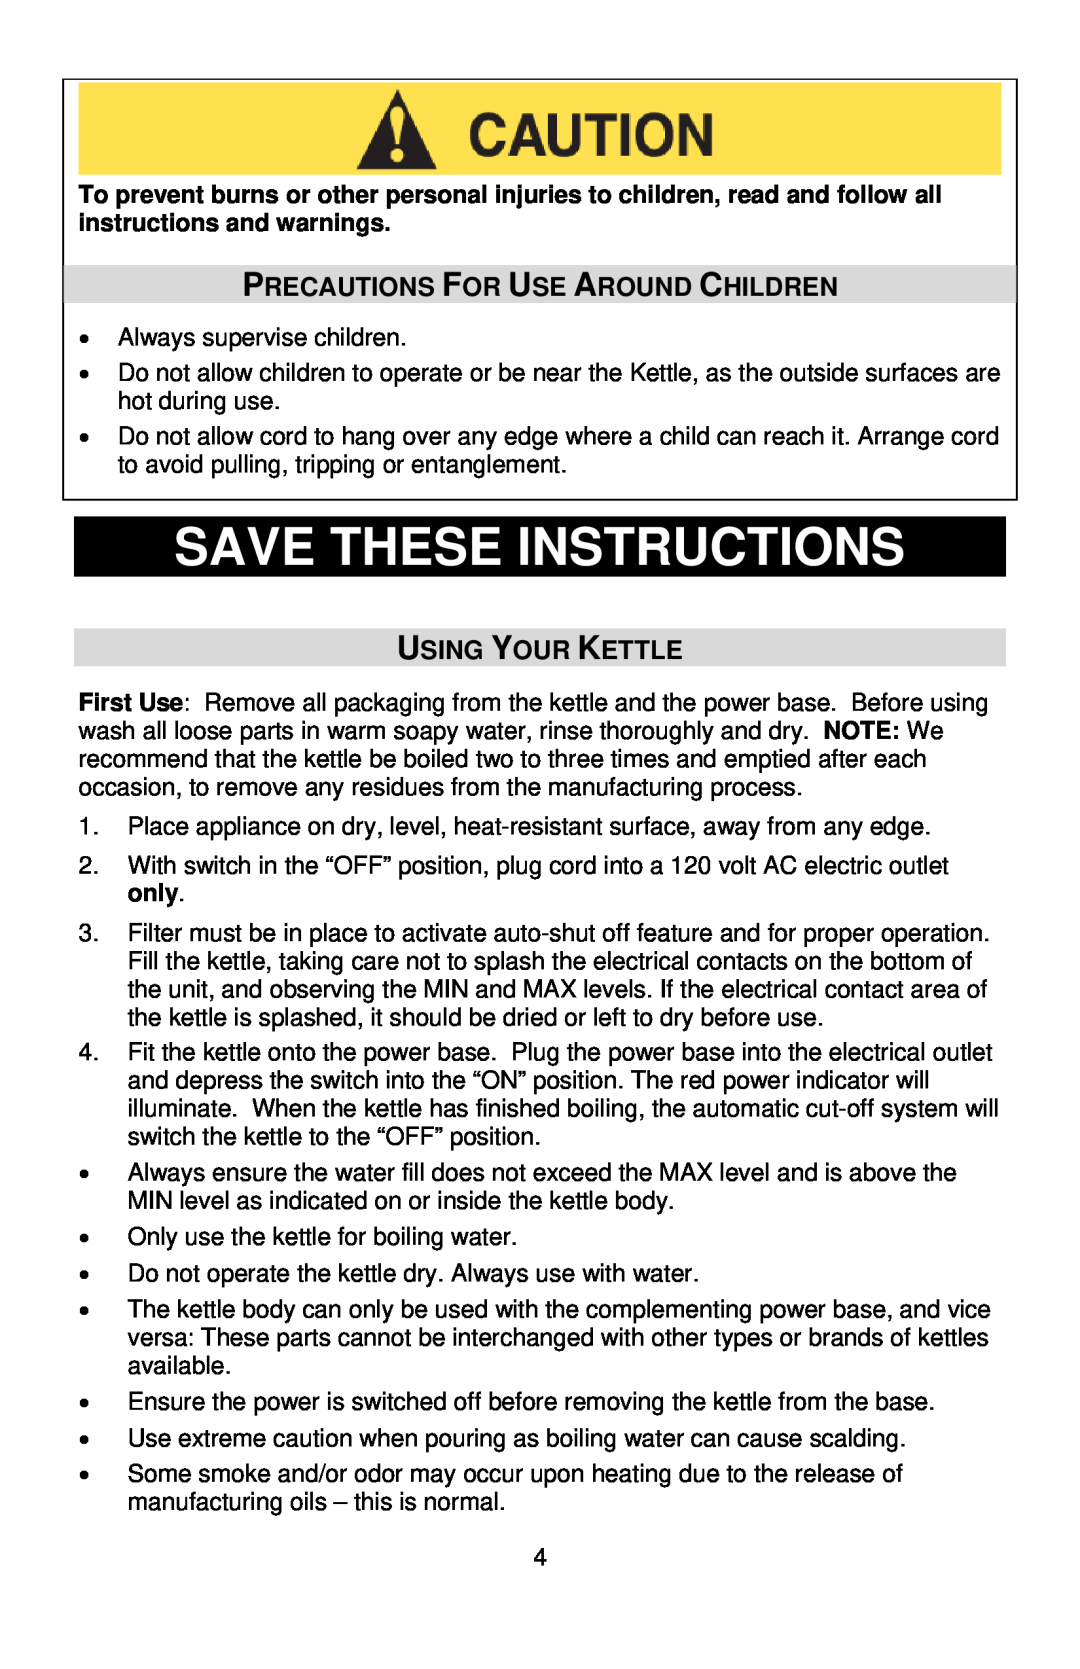 West Bend 53783 instruction manual Save These Instructions, Precautions For Use Around Children, Using Your Kettle 